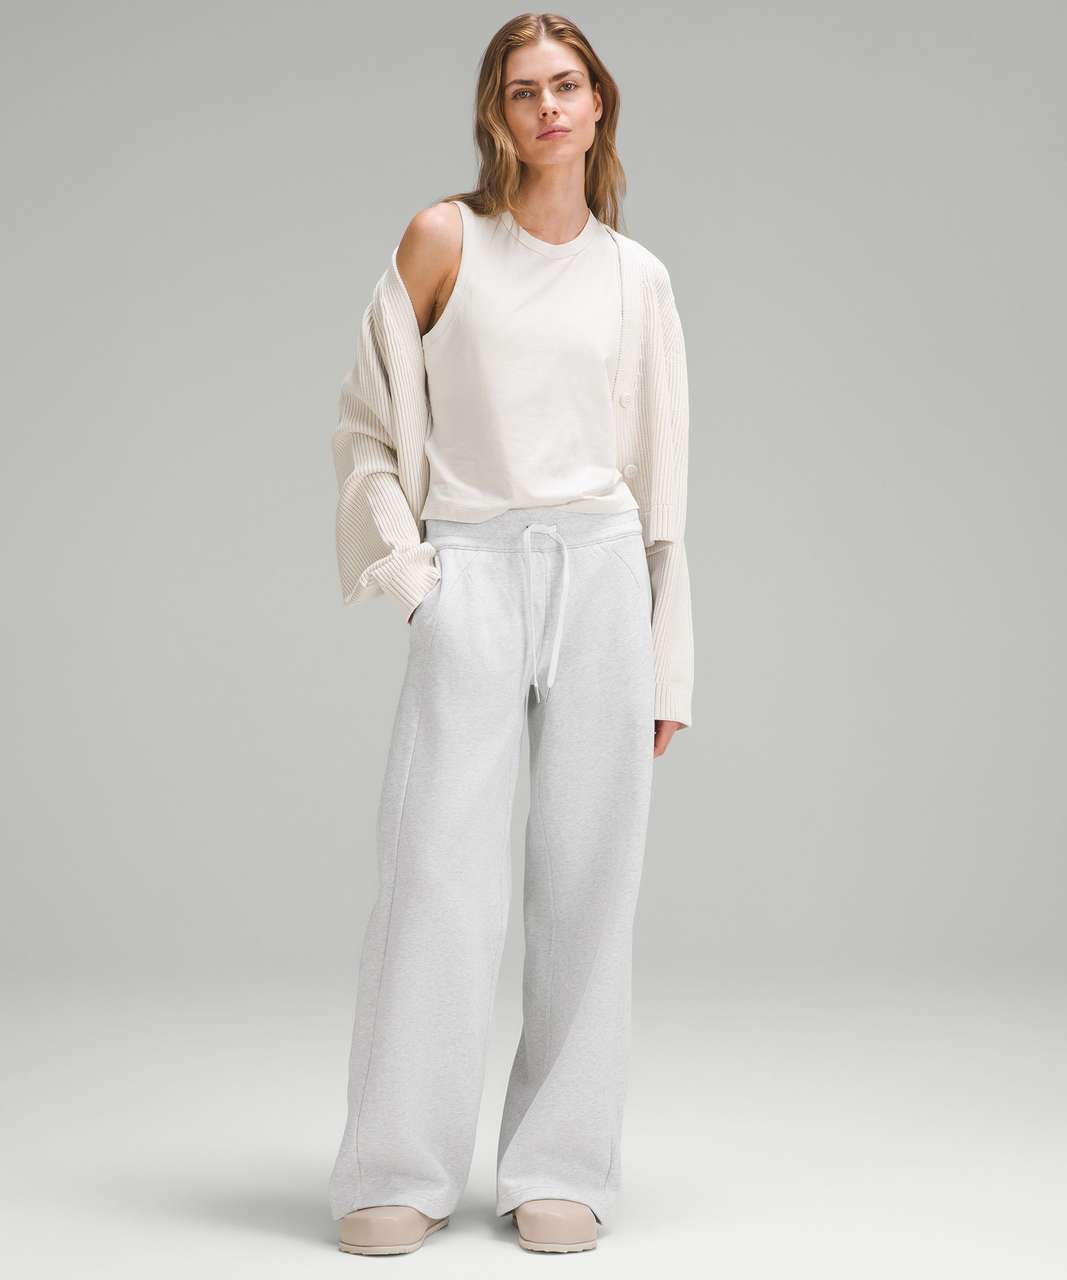 Can the scuba mid rise wide leg pants be hemmed? It's way too long